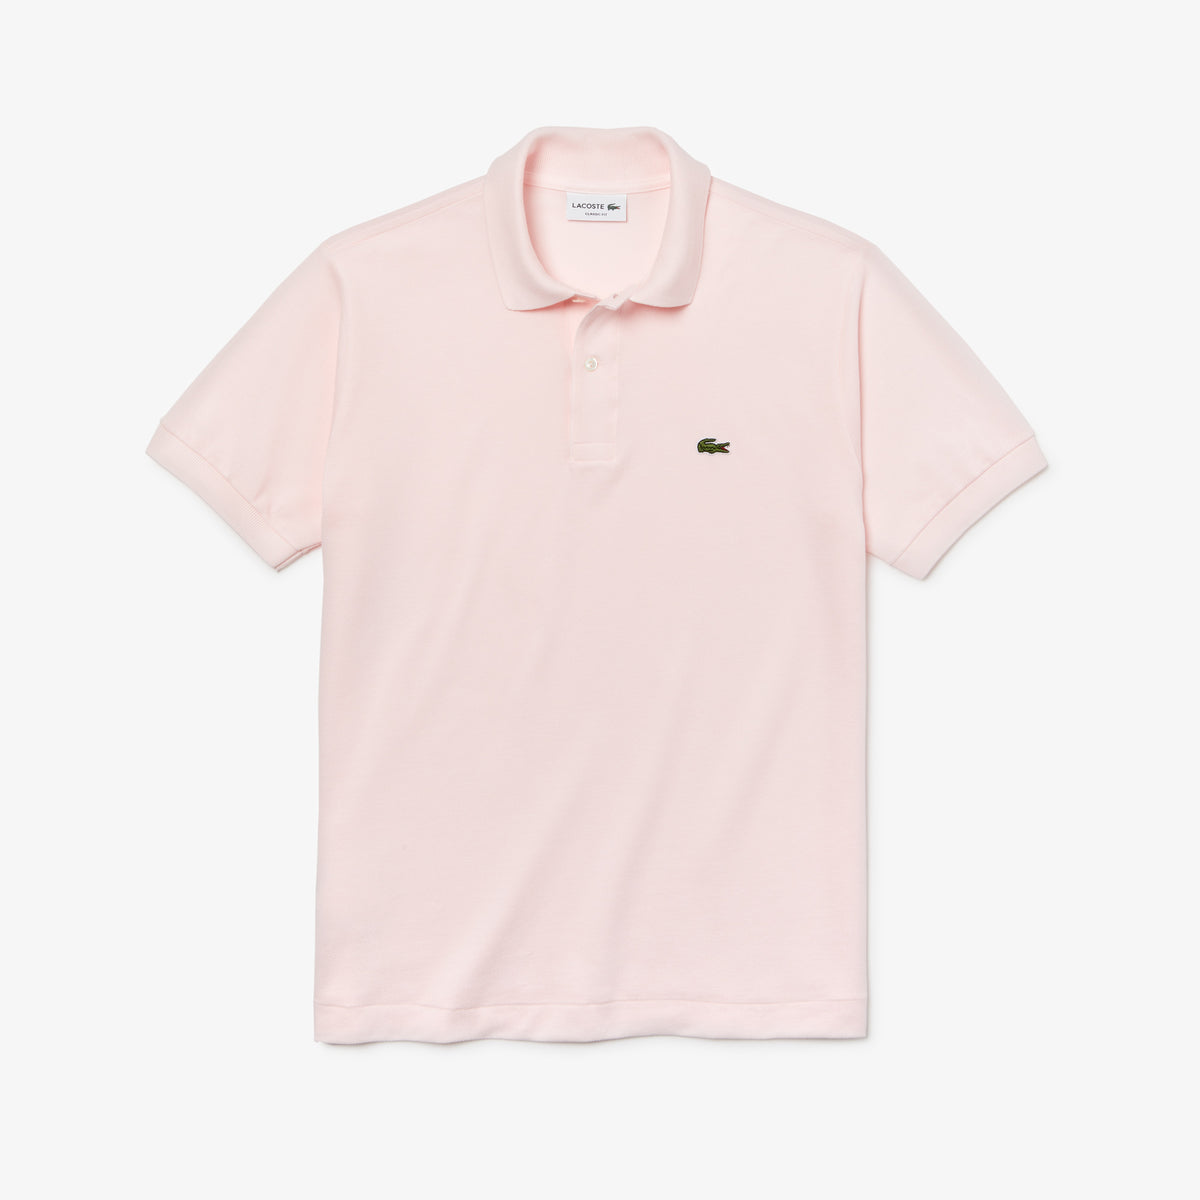 Lacoste - Classic Fit Polo Shirt - Light Pink T03